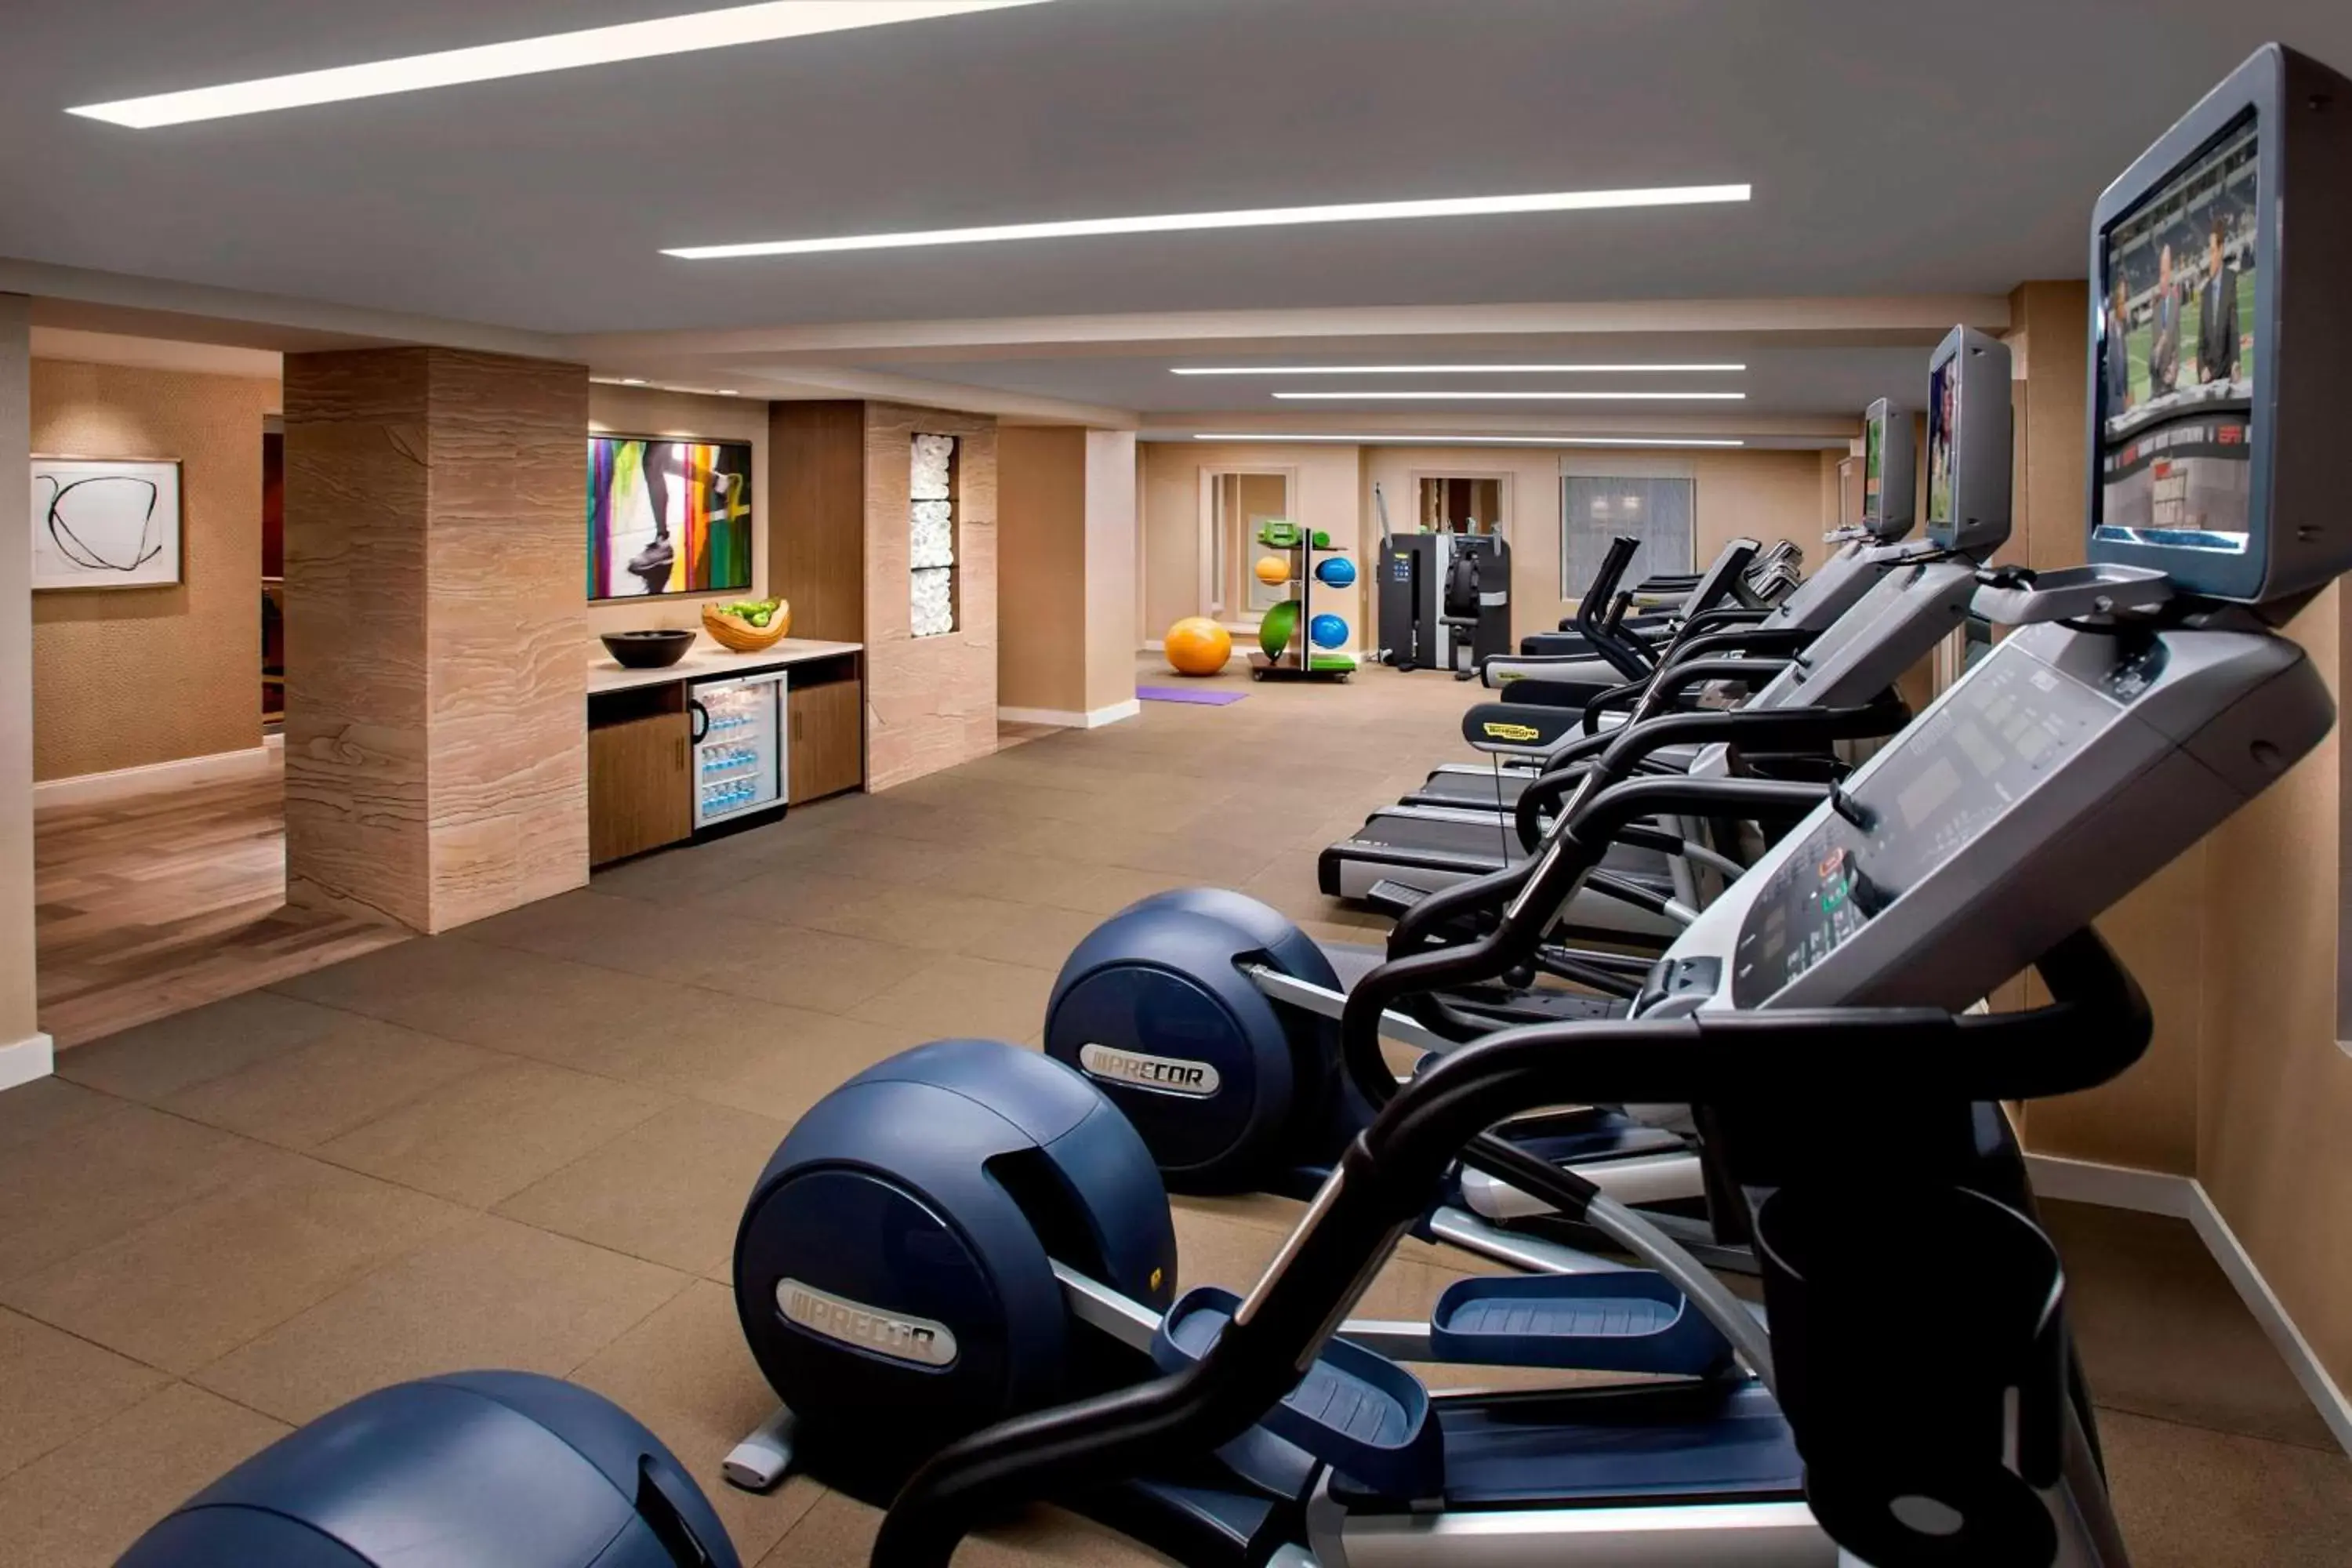 Fitness centre/facilities, Fitness Center/Facilities in JW Marriott Essex House New York